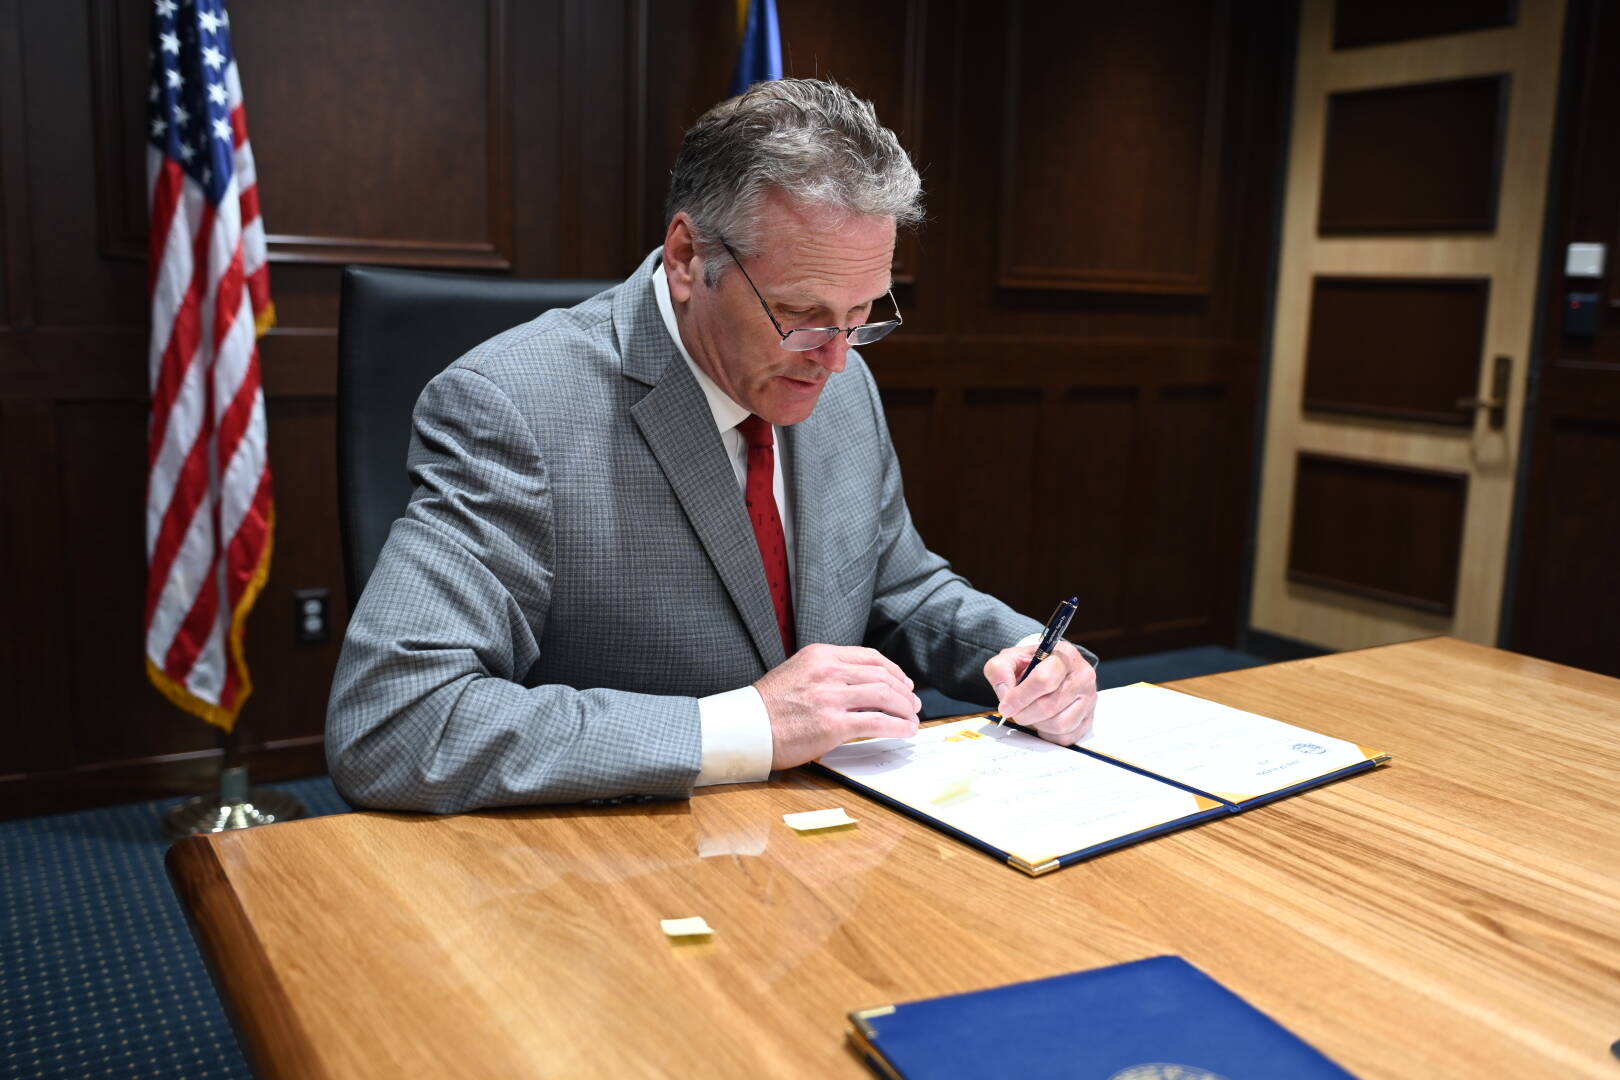 Gov. Mike Dunleavy signs Alaska’s fiscal year 2023 operating and capital budgets into law on Tuesday, June 28, 2022, in Anchorage, Alaska. (Photo courtesy Gov. Mike Dunleavy’s office)